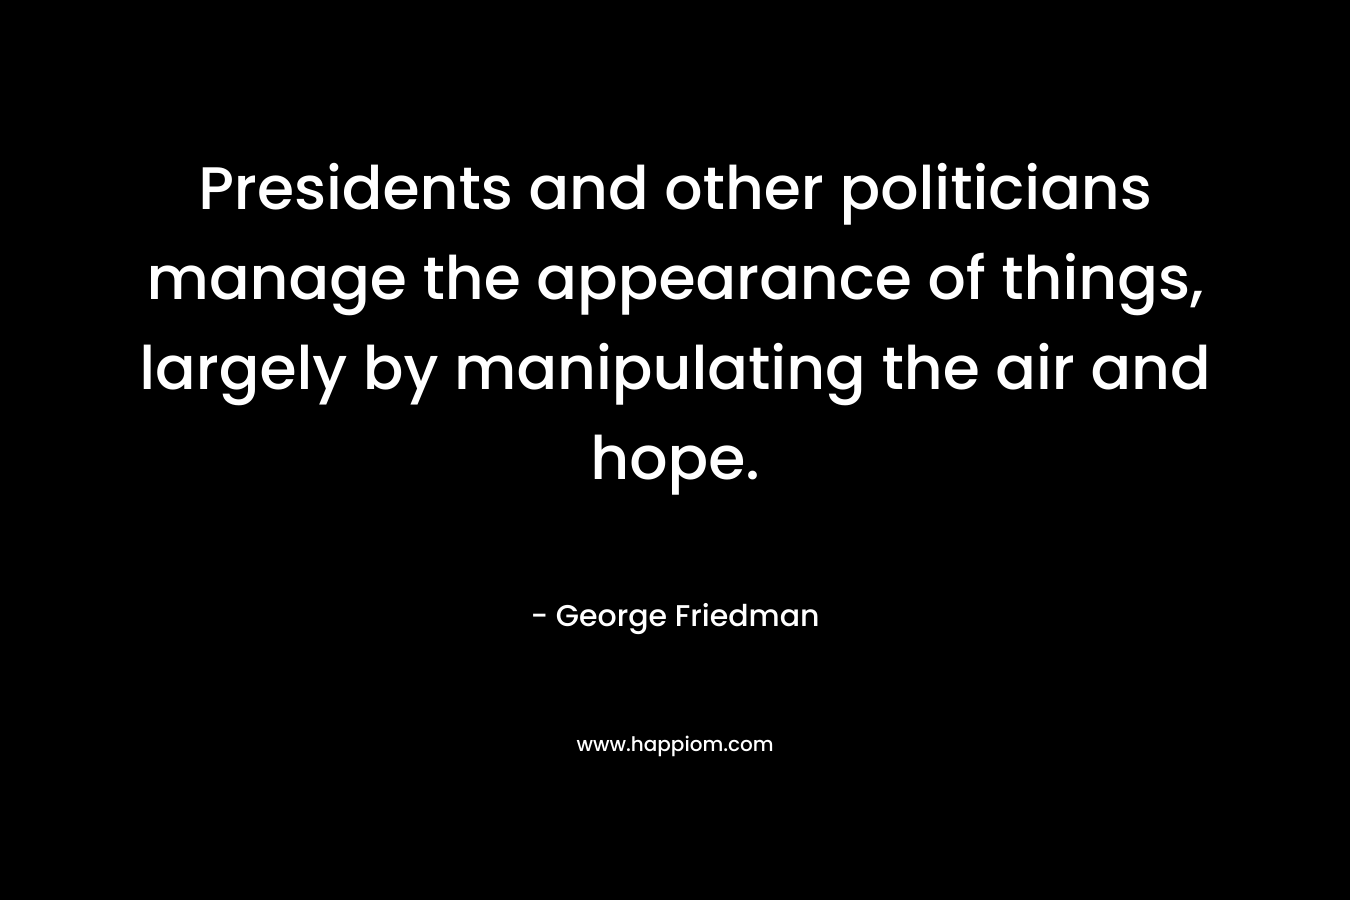 Presidents and other politicians manage the appearance of things, largely by manipulating the air and hope. – George Friedman